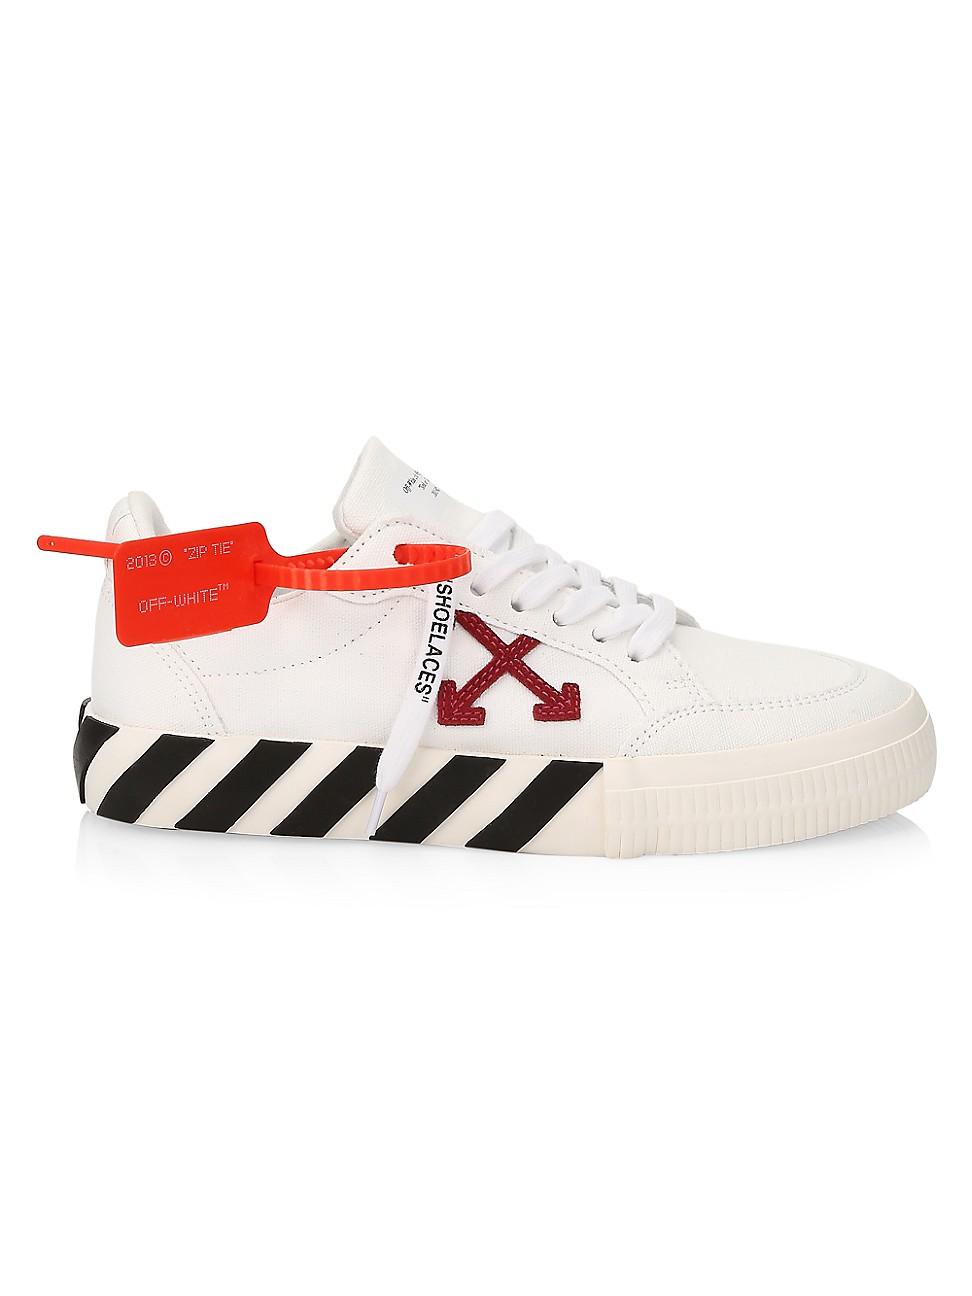 Off-White c/o Virgil Abloh Low Vulcanized Canvas Sneakers in White